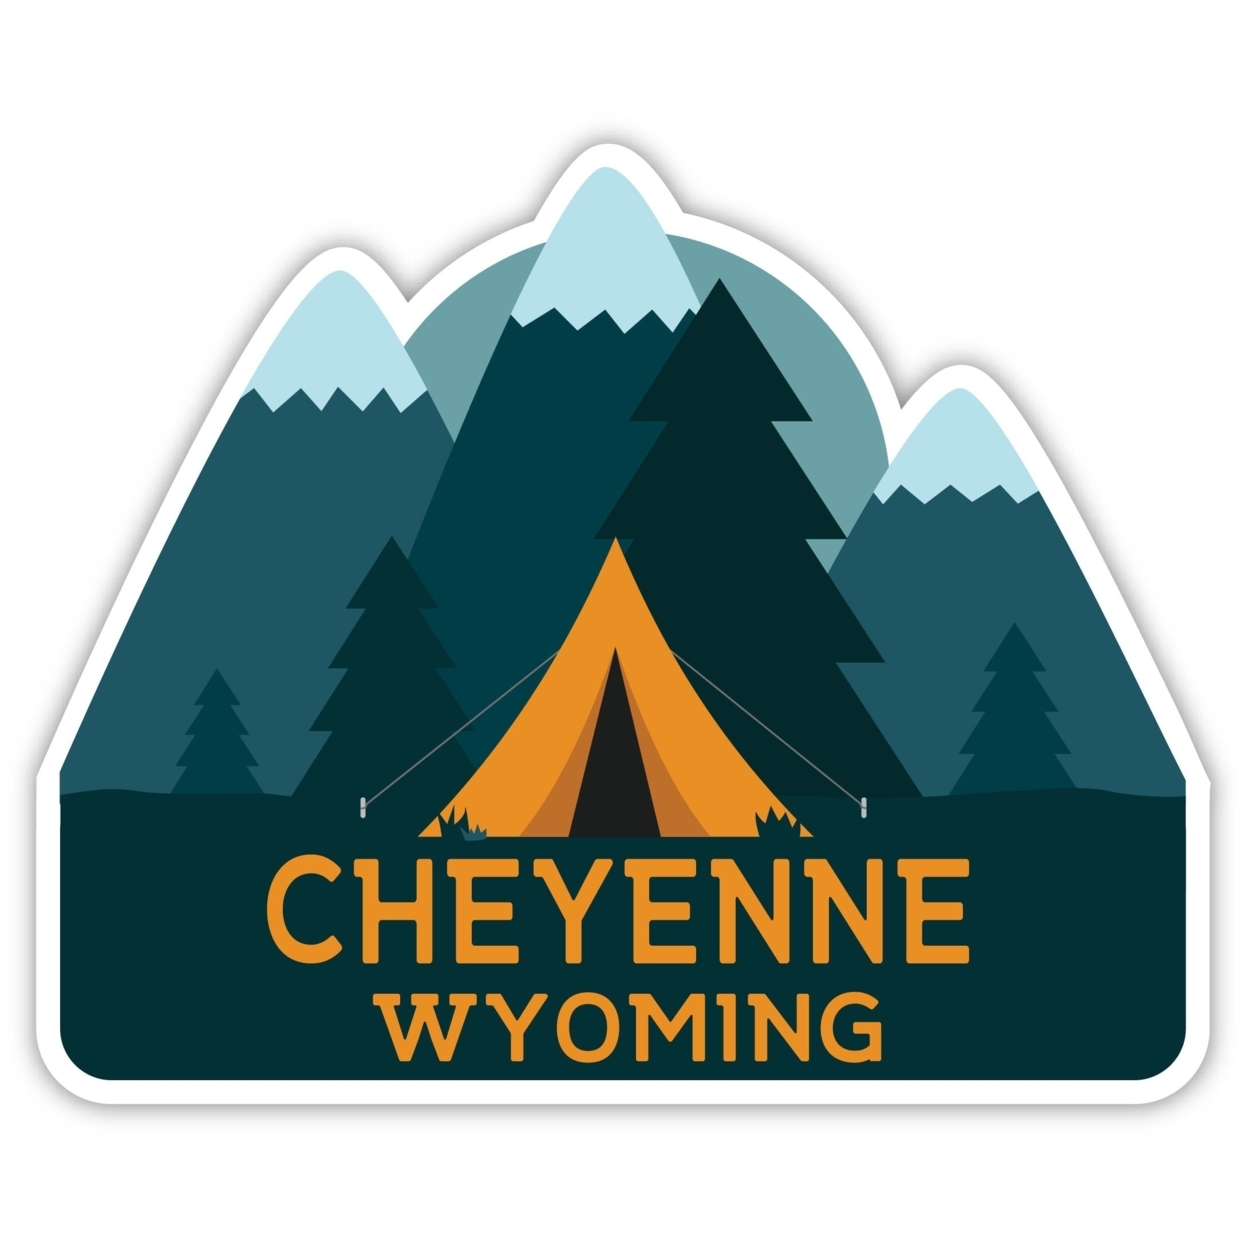 Cheyenne Wyoming Souvenir Decorative Stickers (Choose Theme And Size) - 4-Pack, 12-Inch, Bear